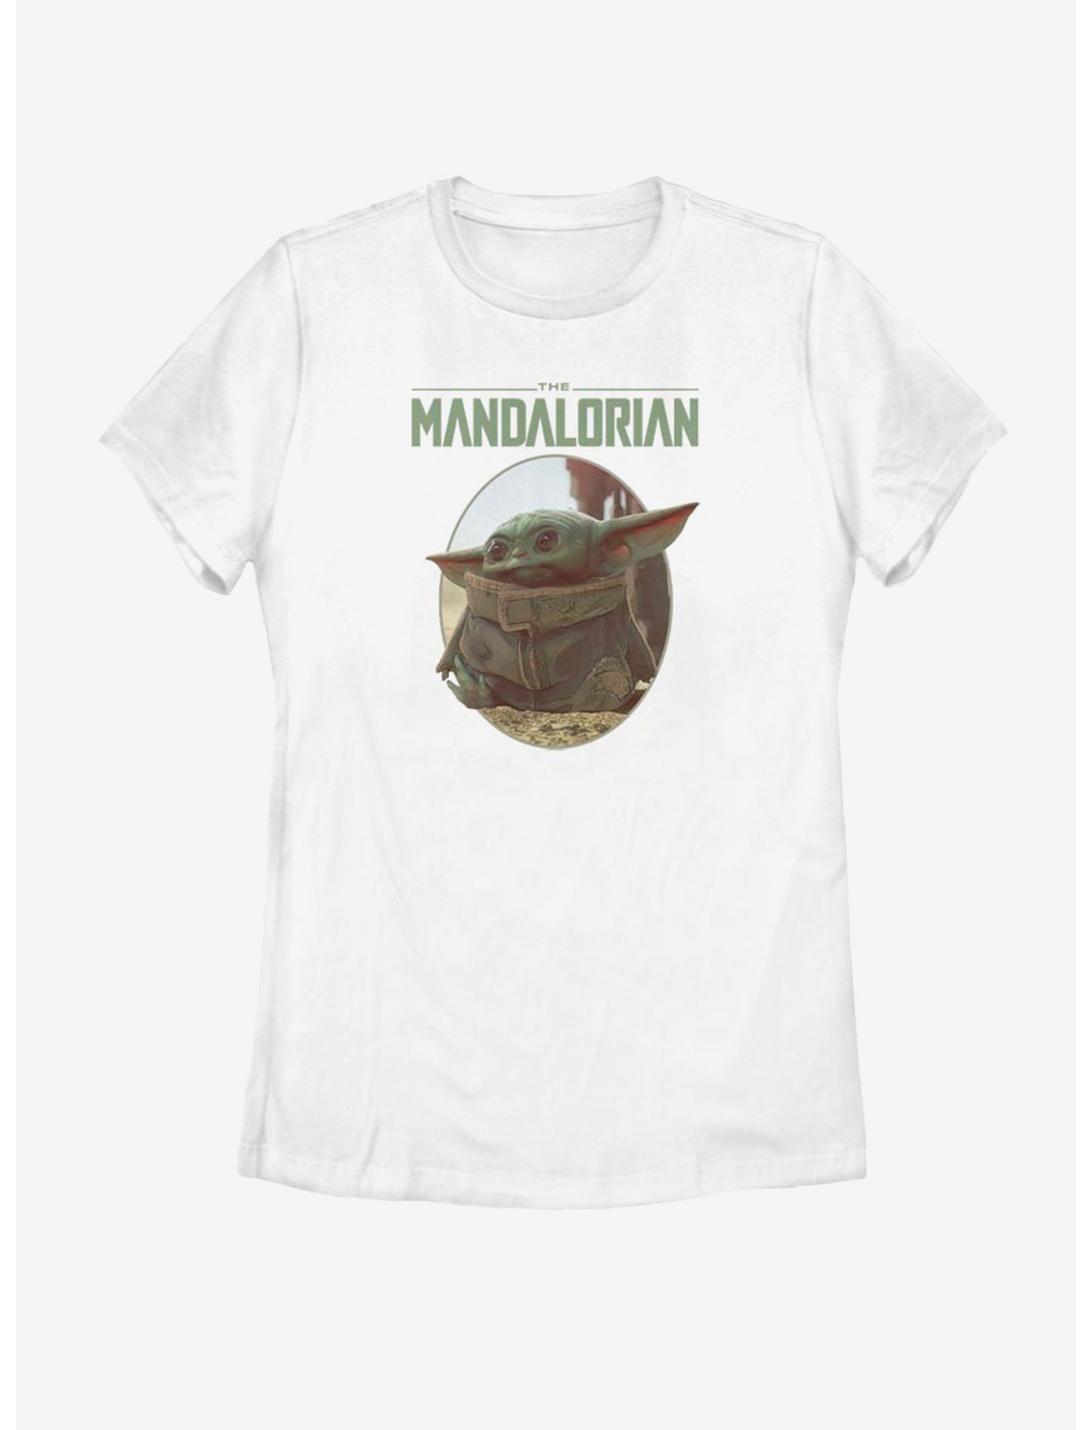 Star Wars The Mandalorian The Child The Look Womens T-Shirt, WHITE, hi-res